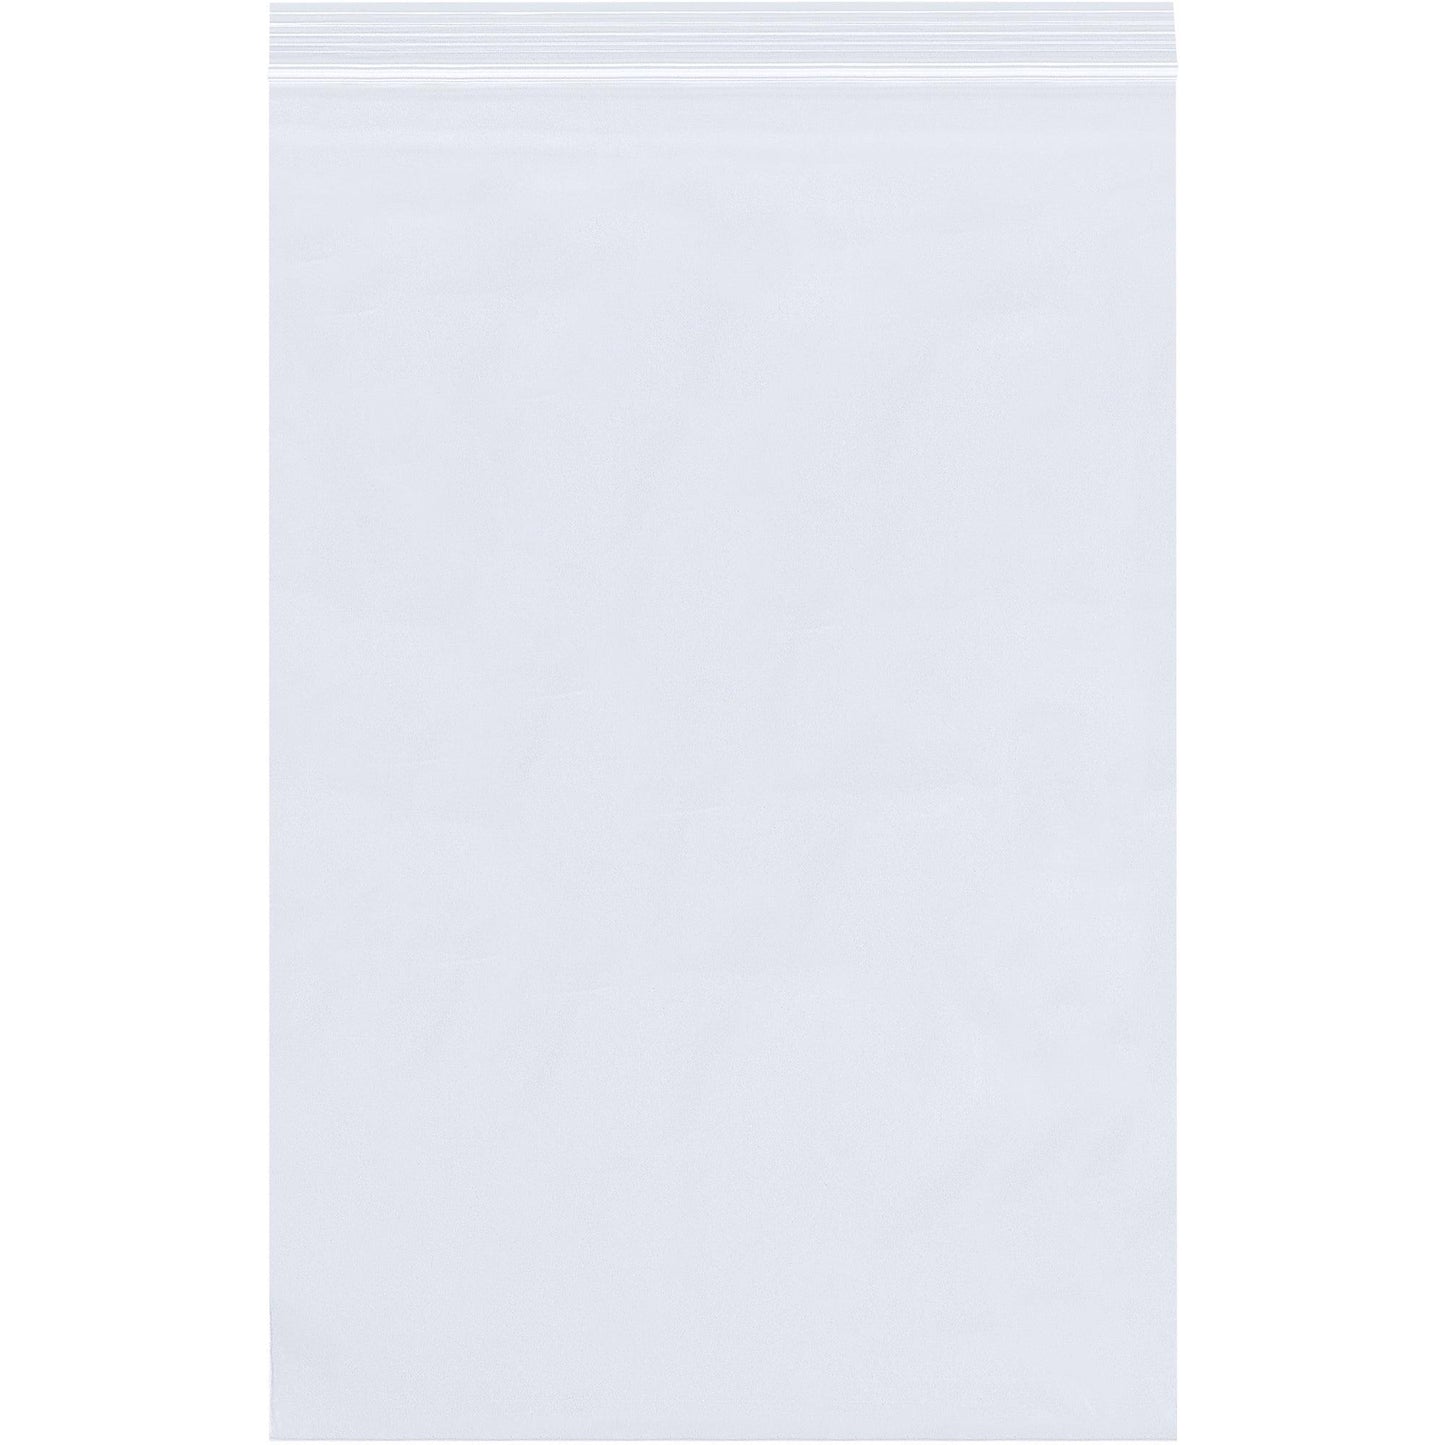 6 x 6" - 8 Mil Reclosable Poly Bags - PB3913